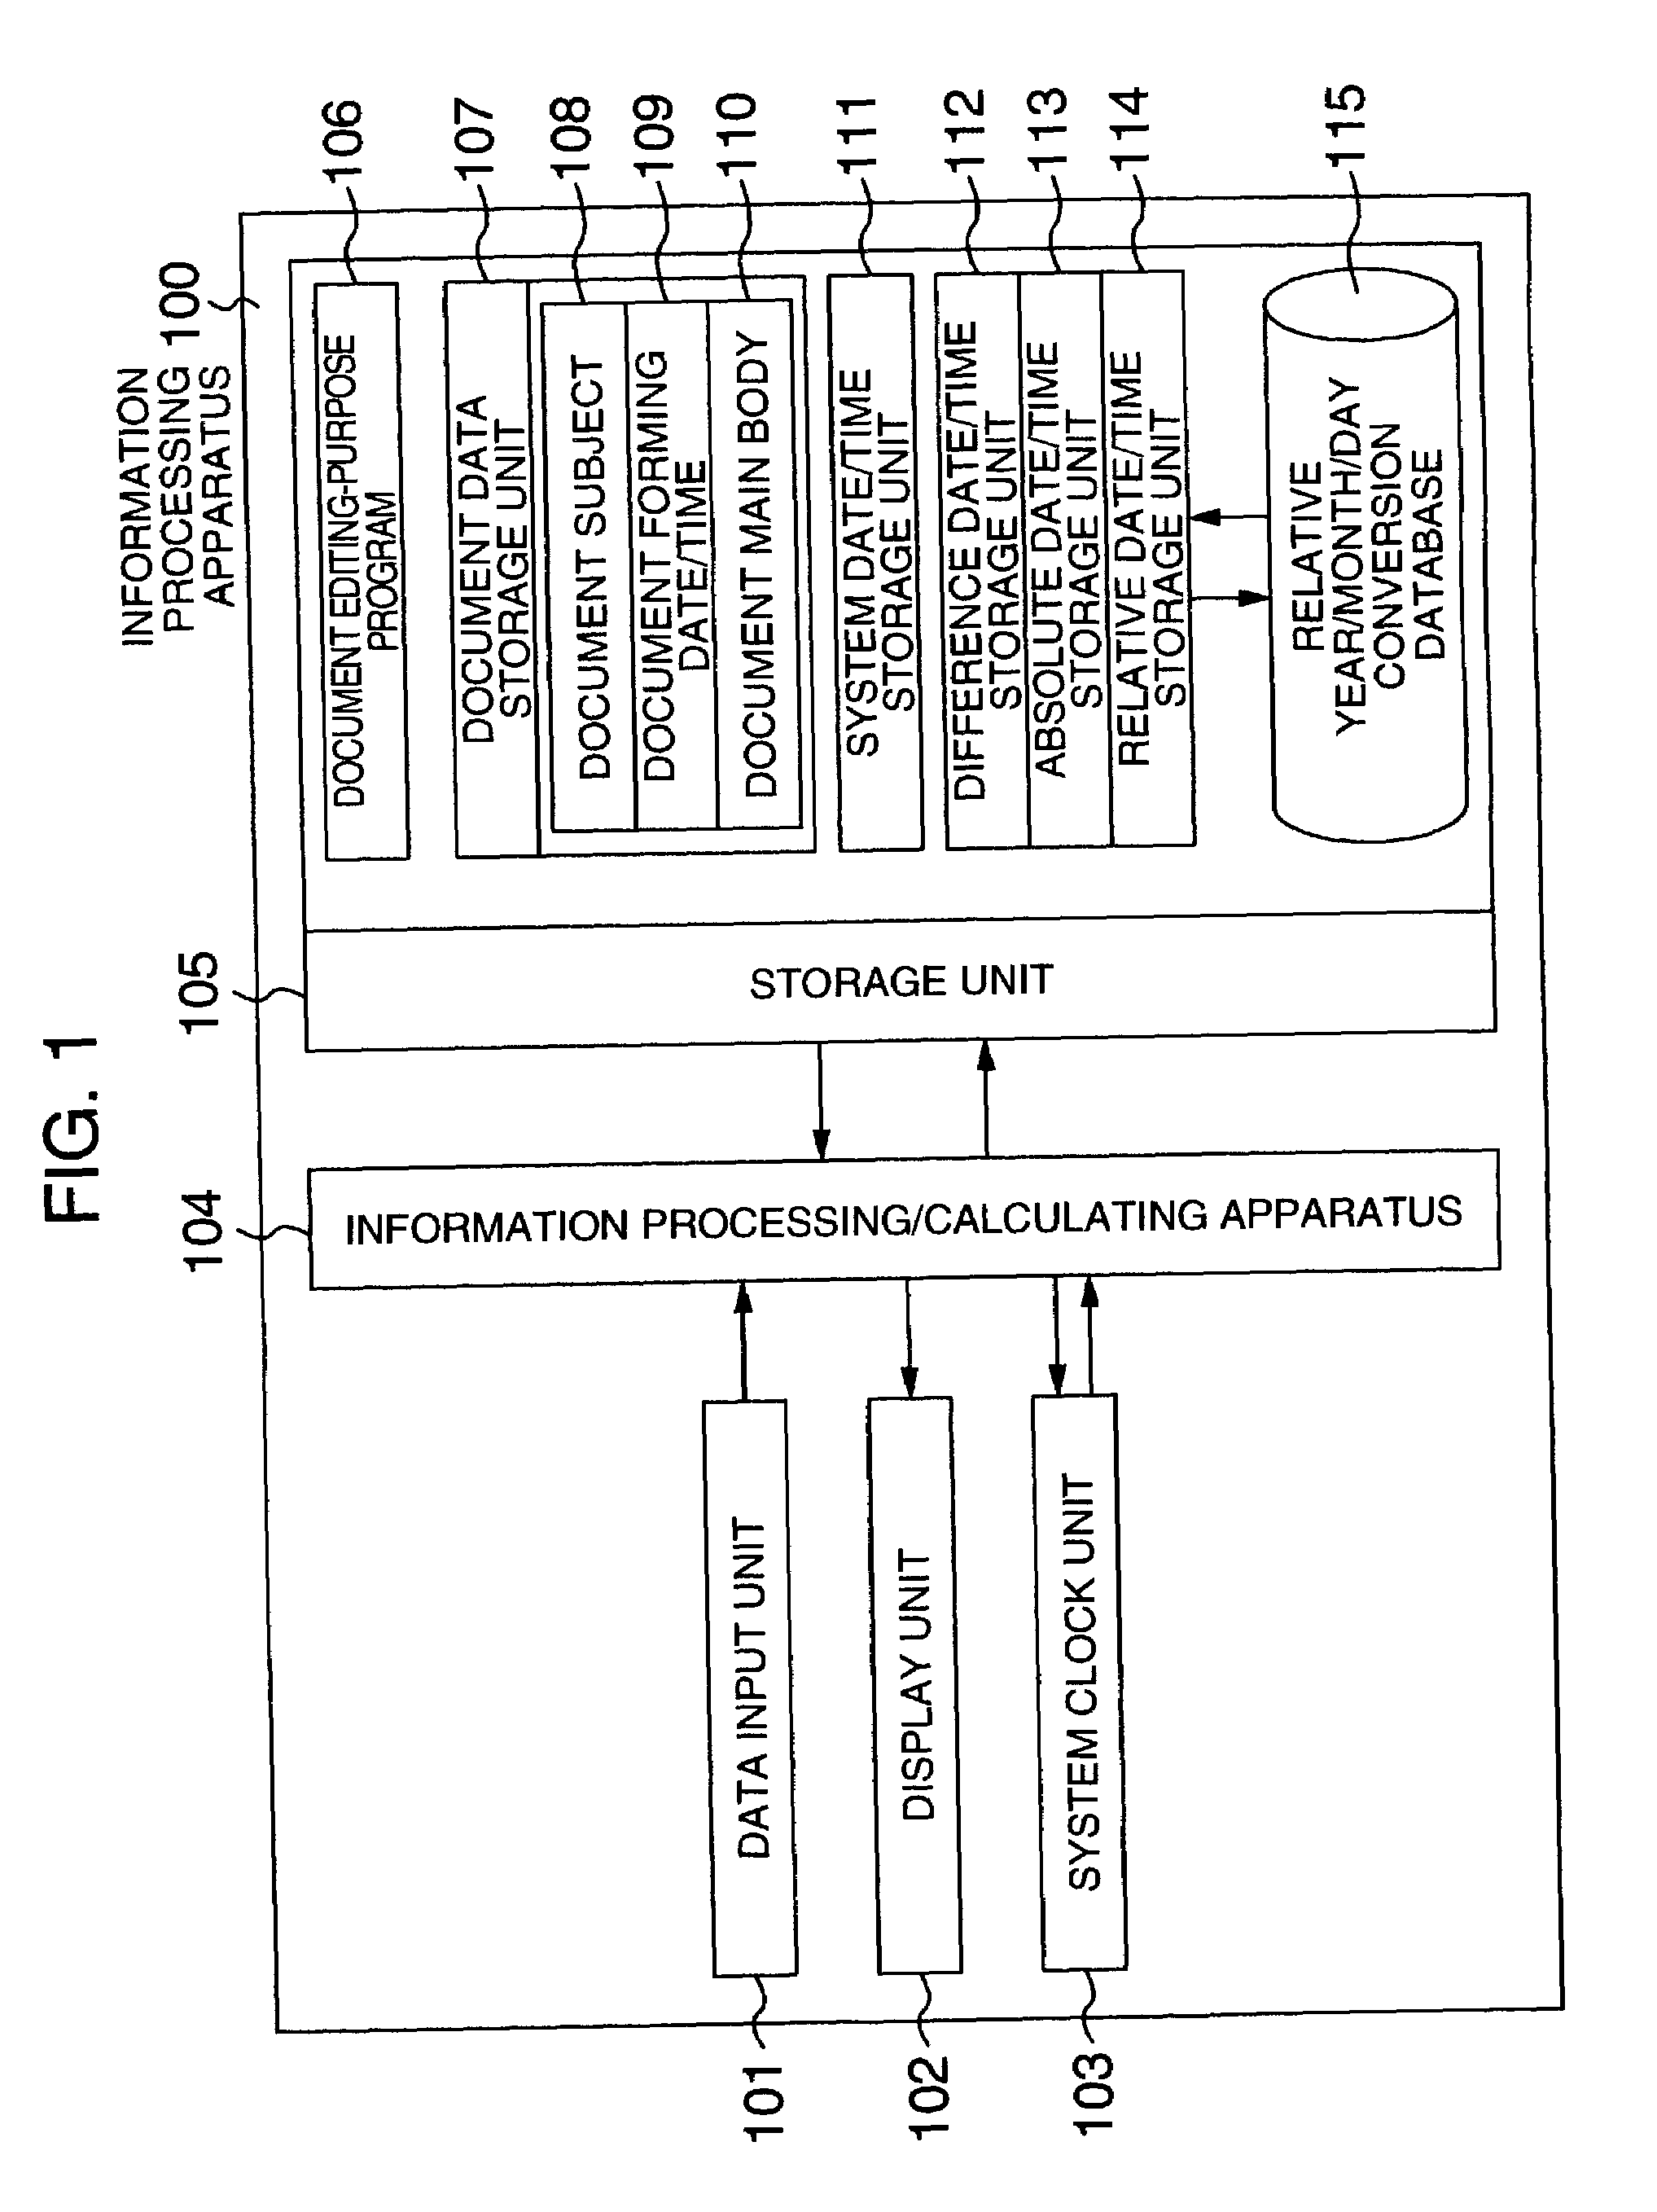 Time information display system